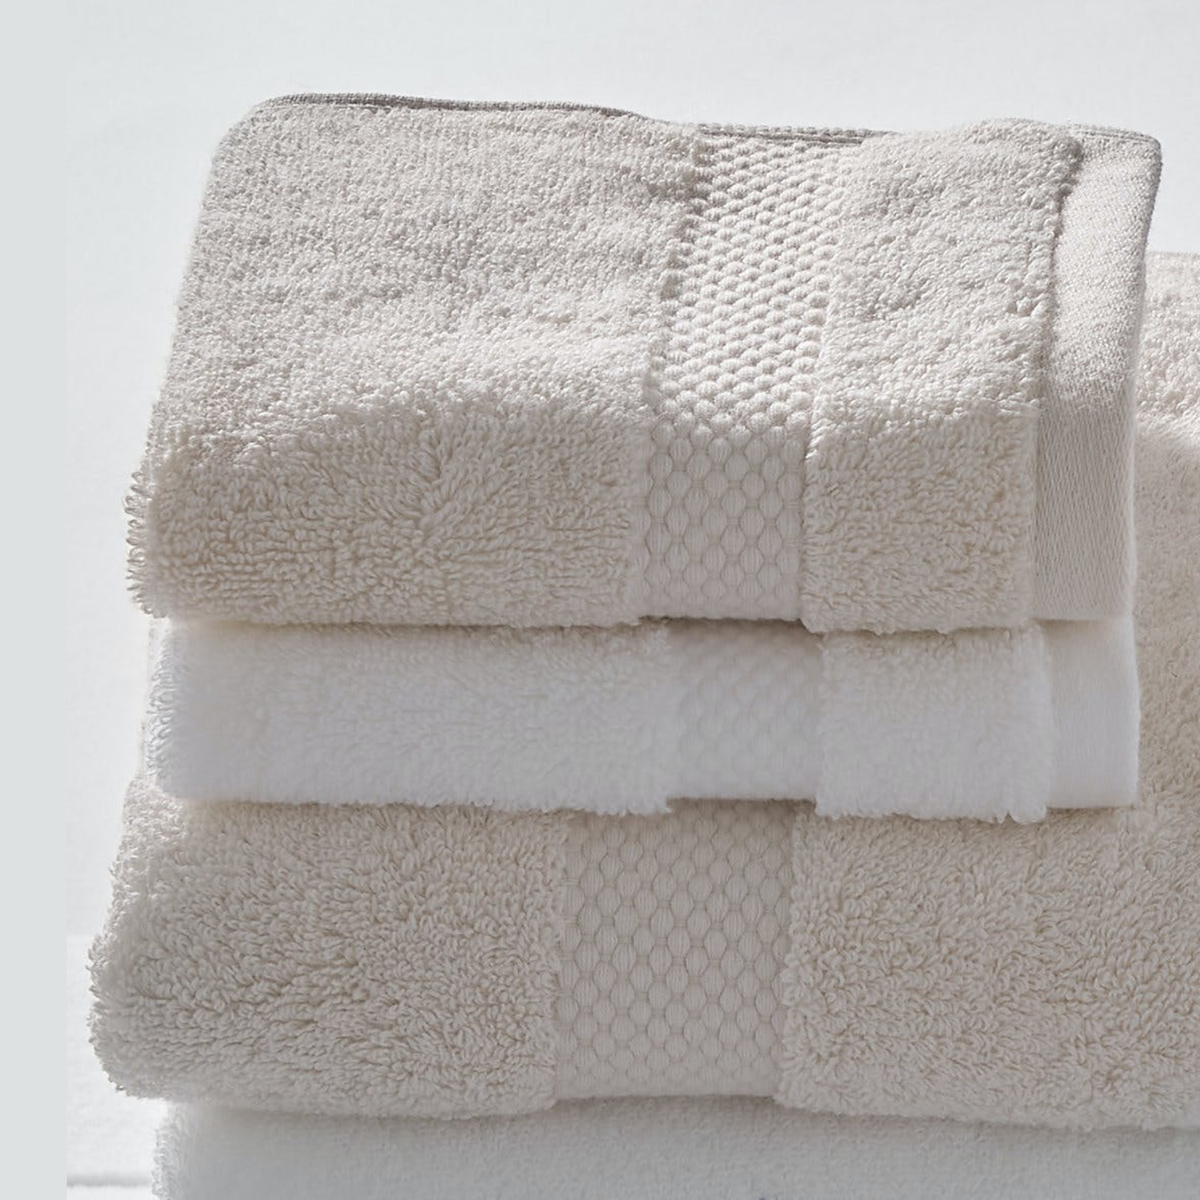 Stack of Matouk Guesthouse Bath Towels and Mat in Both Colors